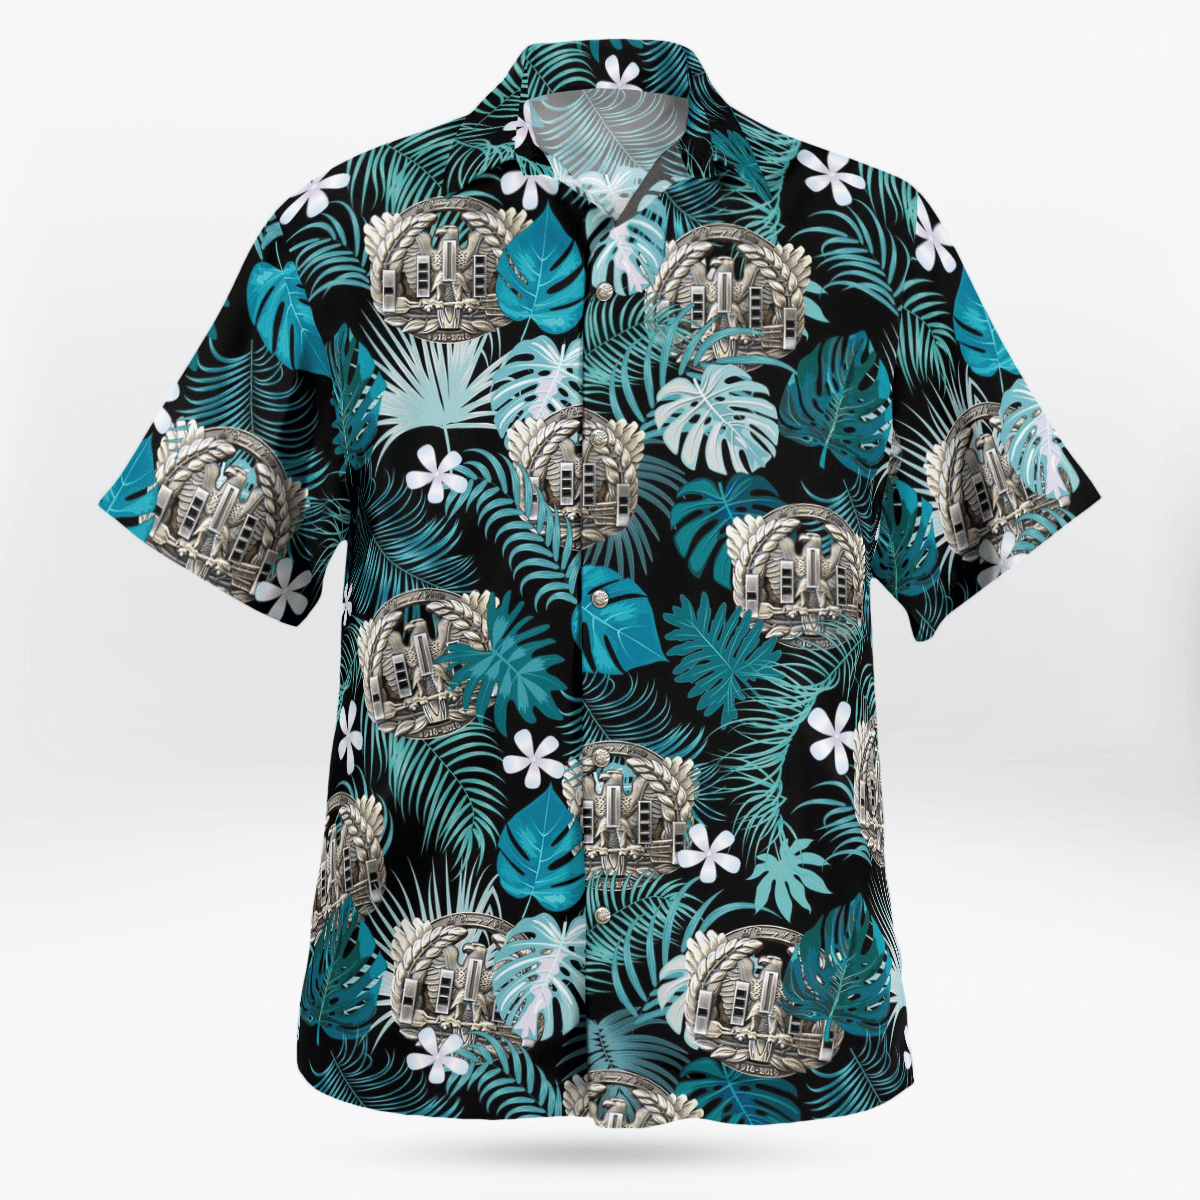 Hawaiian shirts never go out of style 191